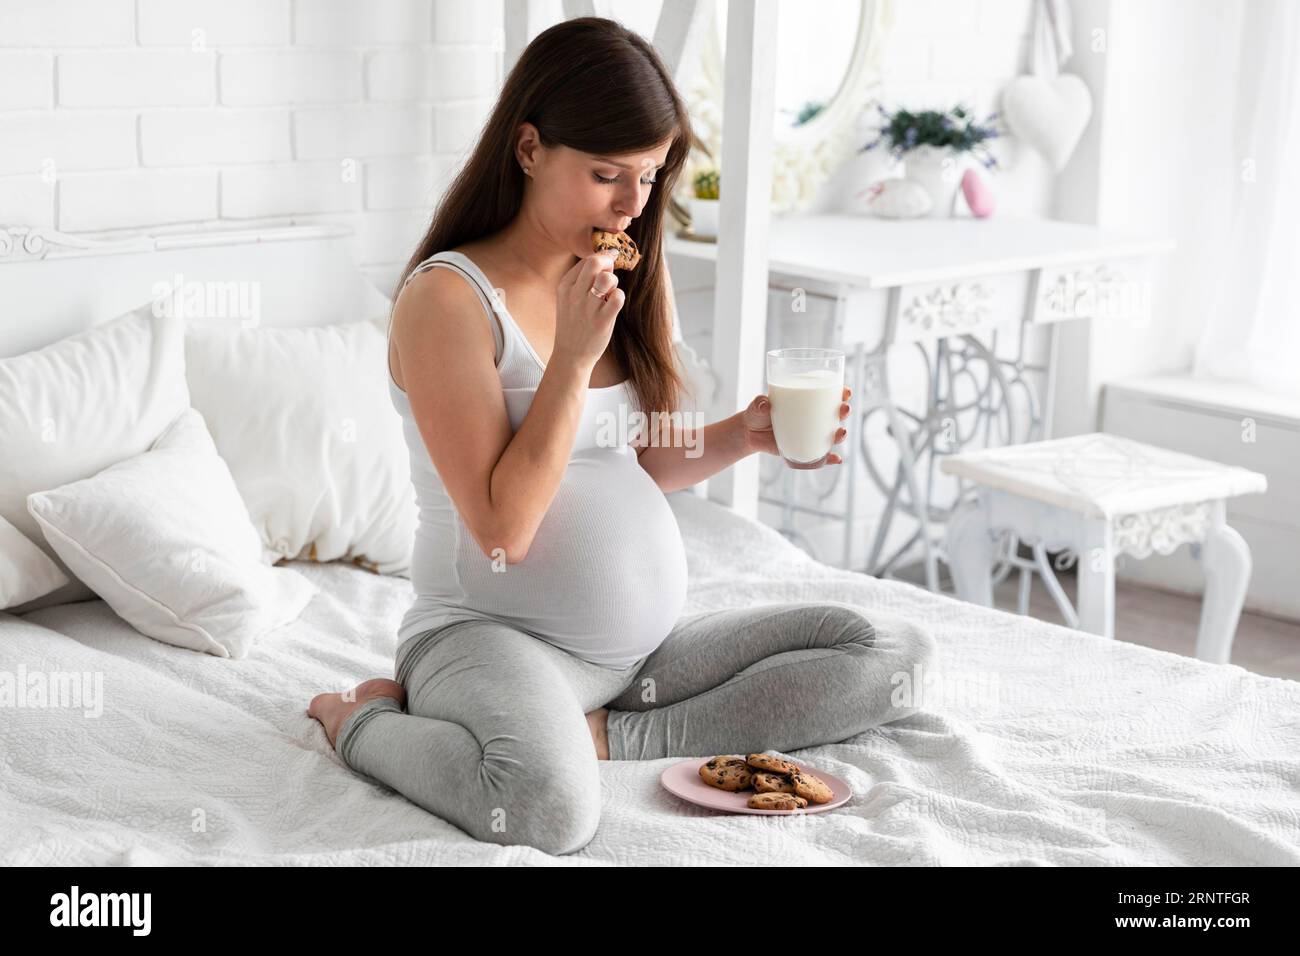 Pregnant woman eating chocolate cookies drinking milk Stock Photo